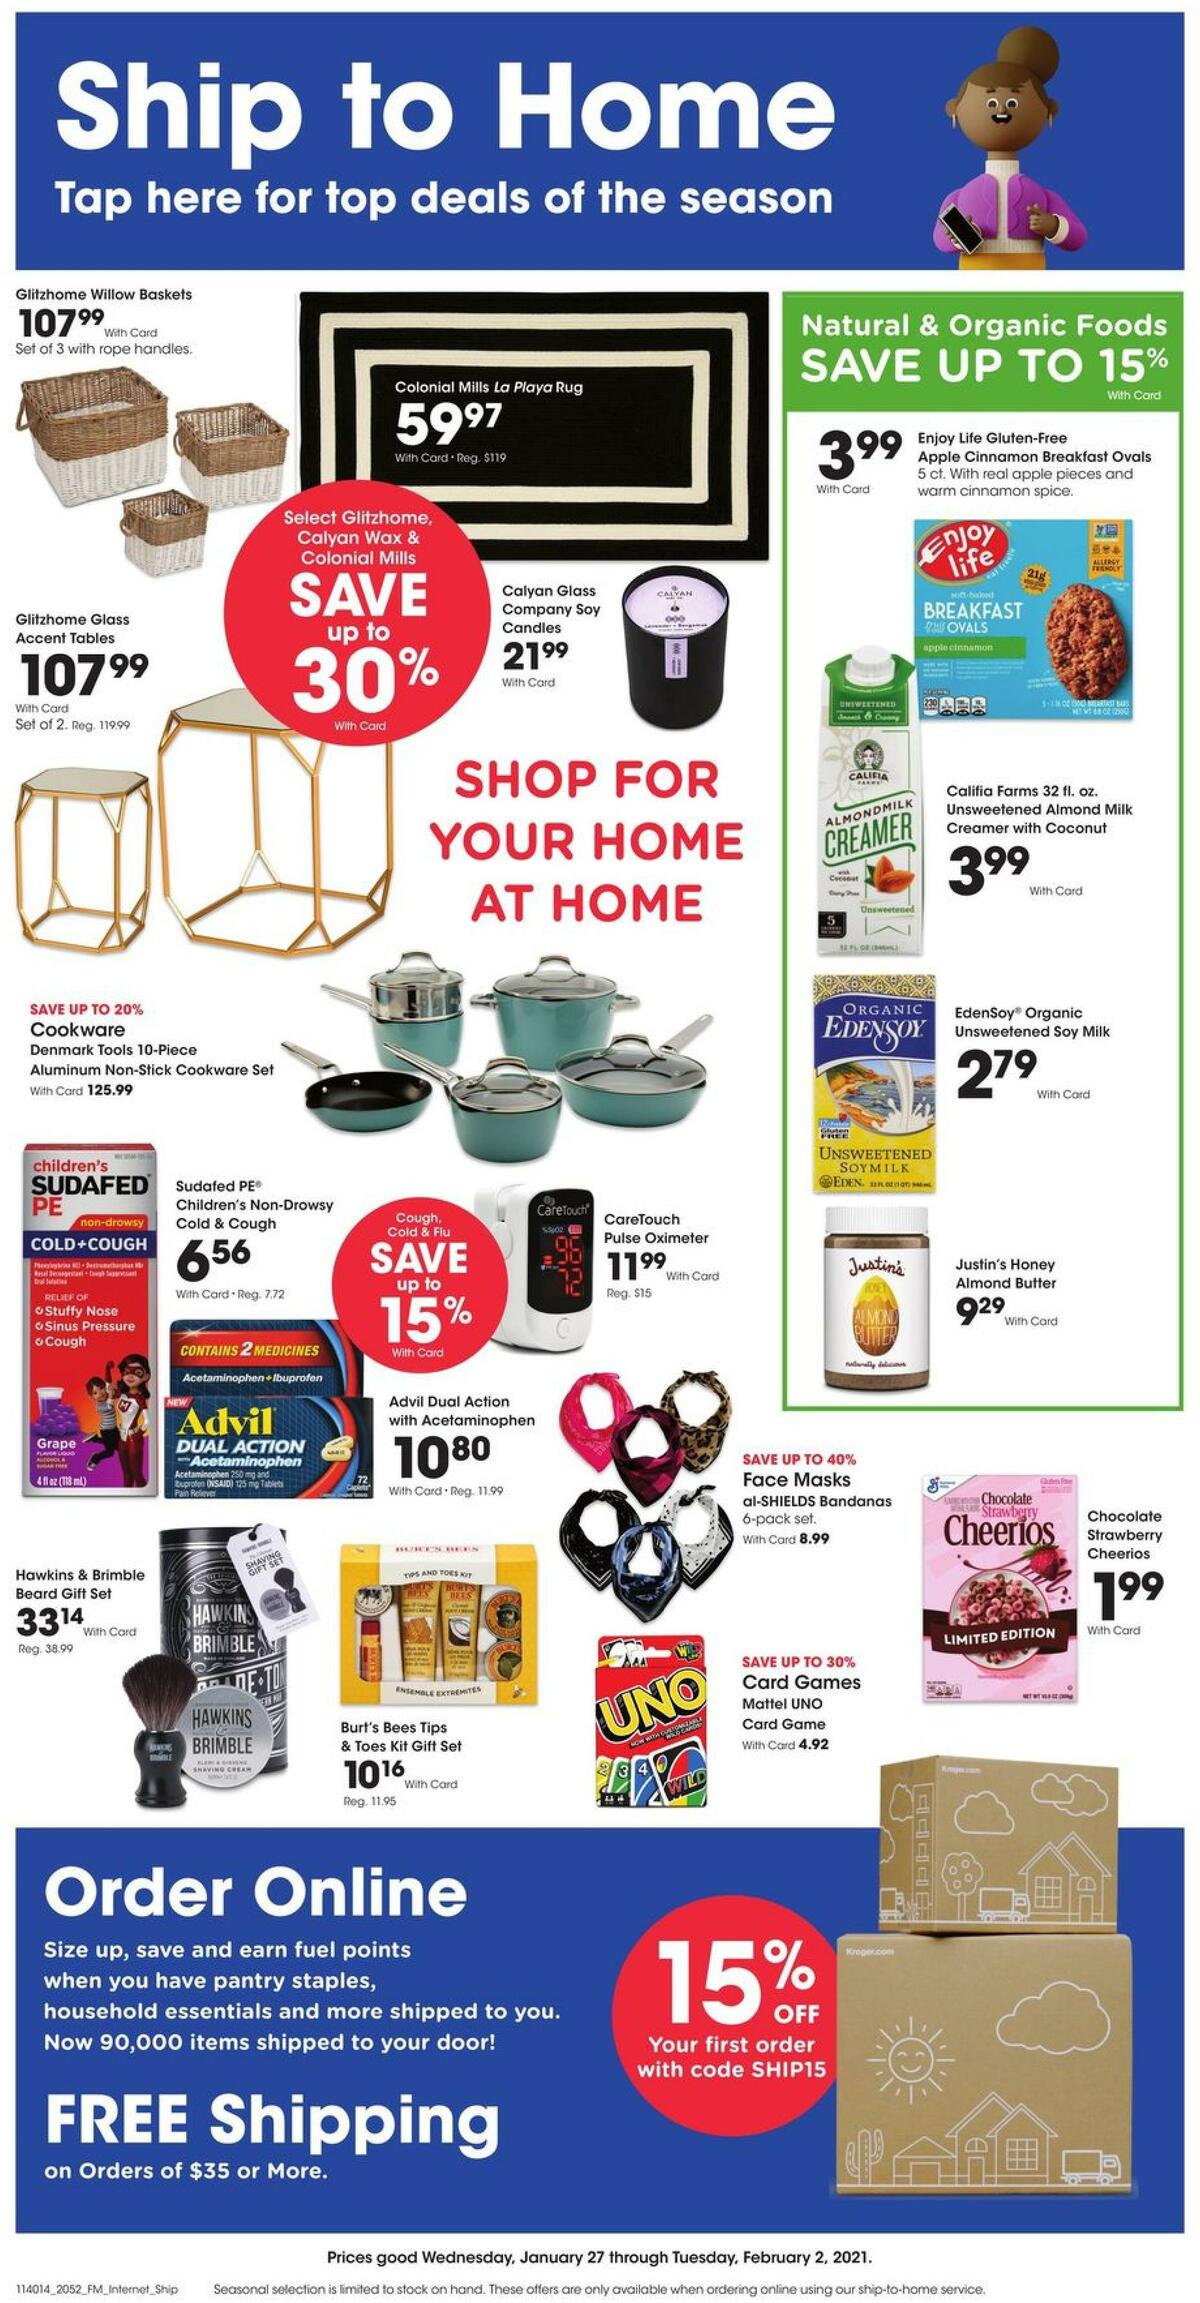 Fred Meyer Ship to Home Weekly Ad from January 27